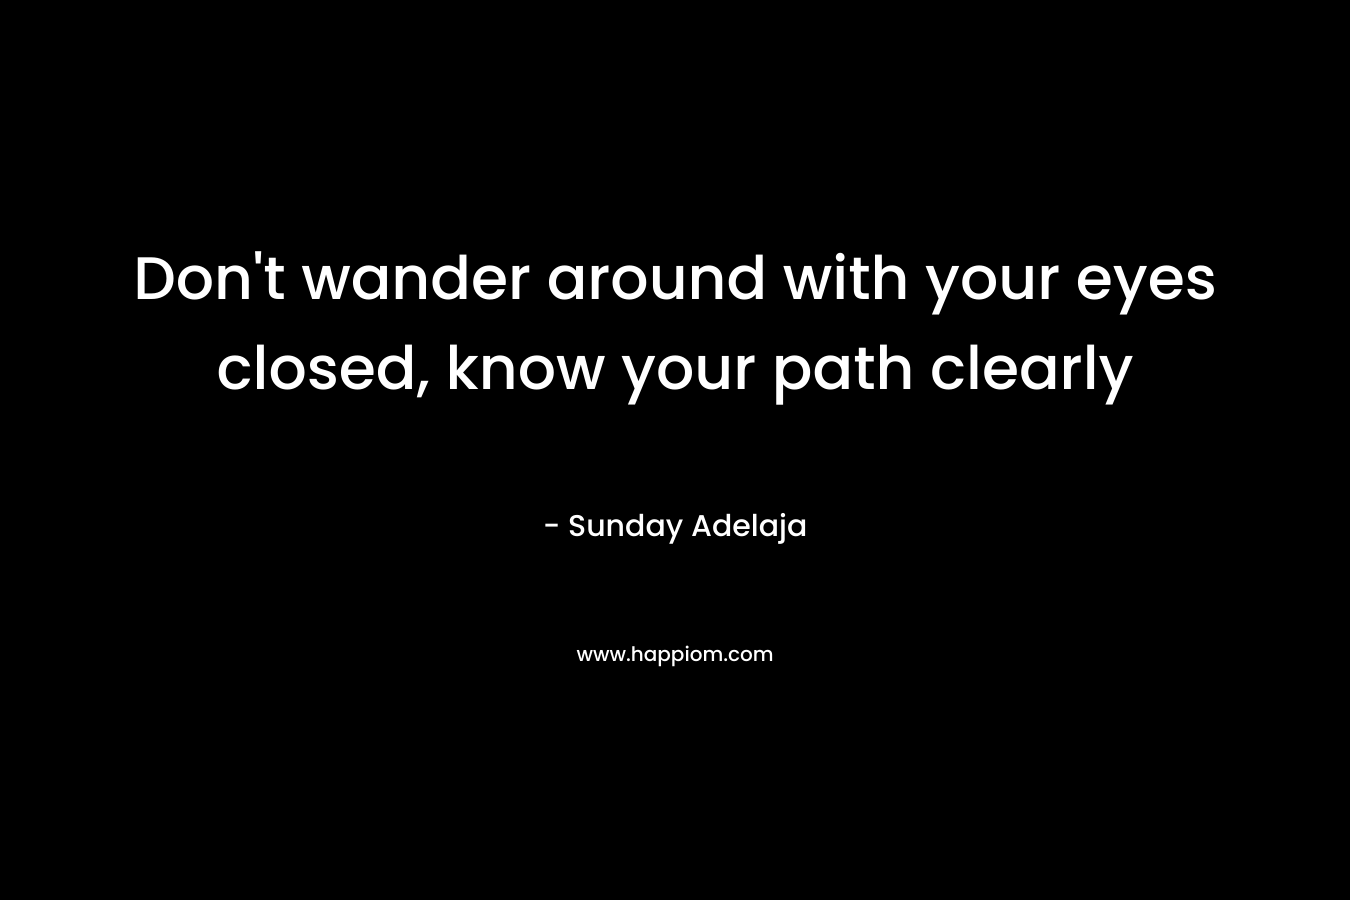 Don't wander around with your eyes closed, know your path clearly